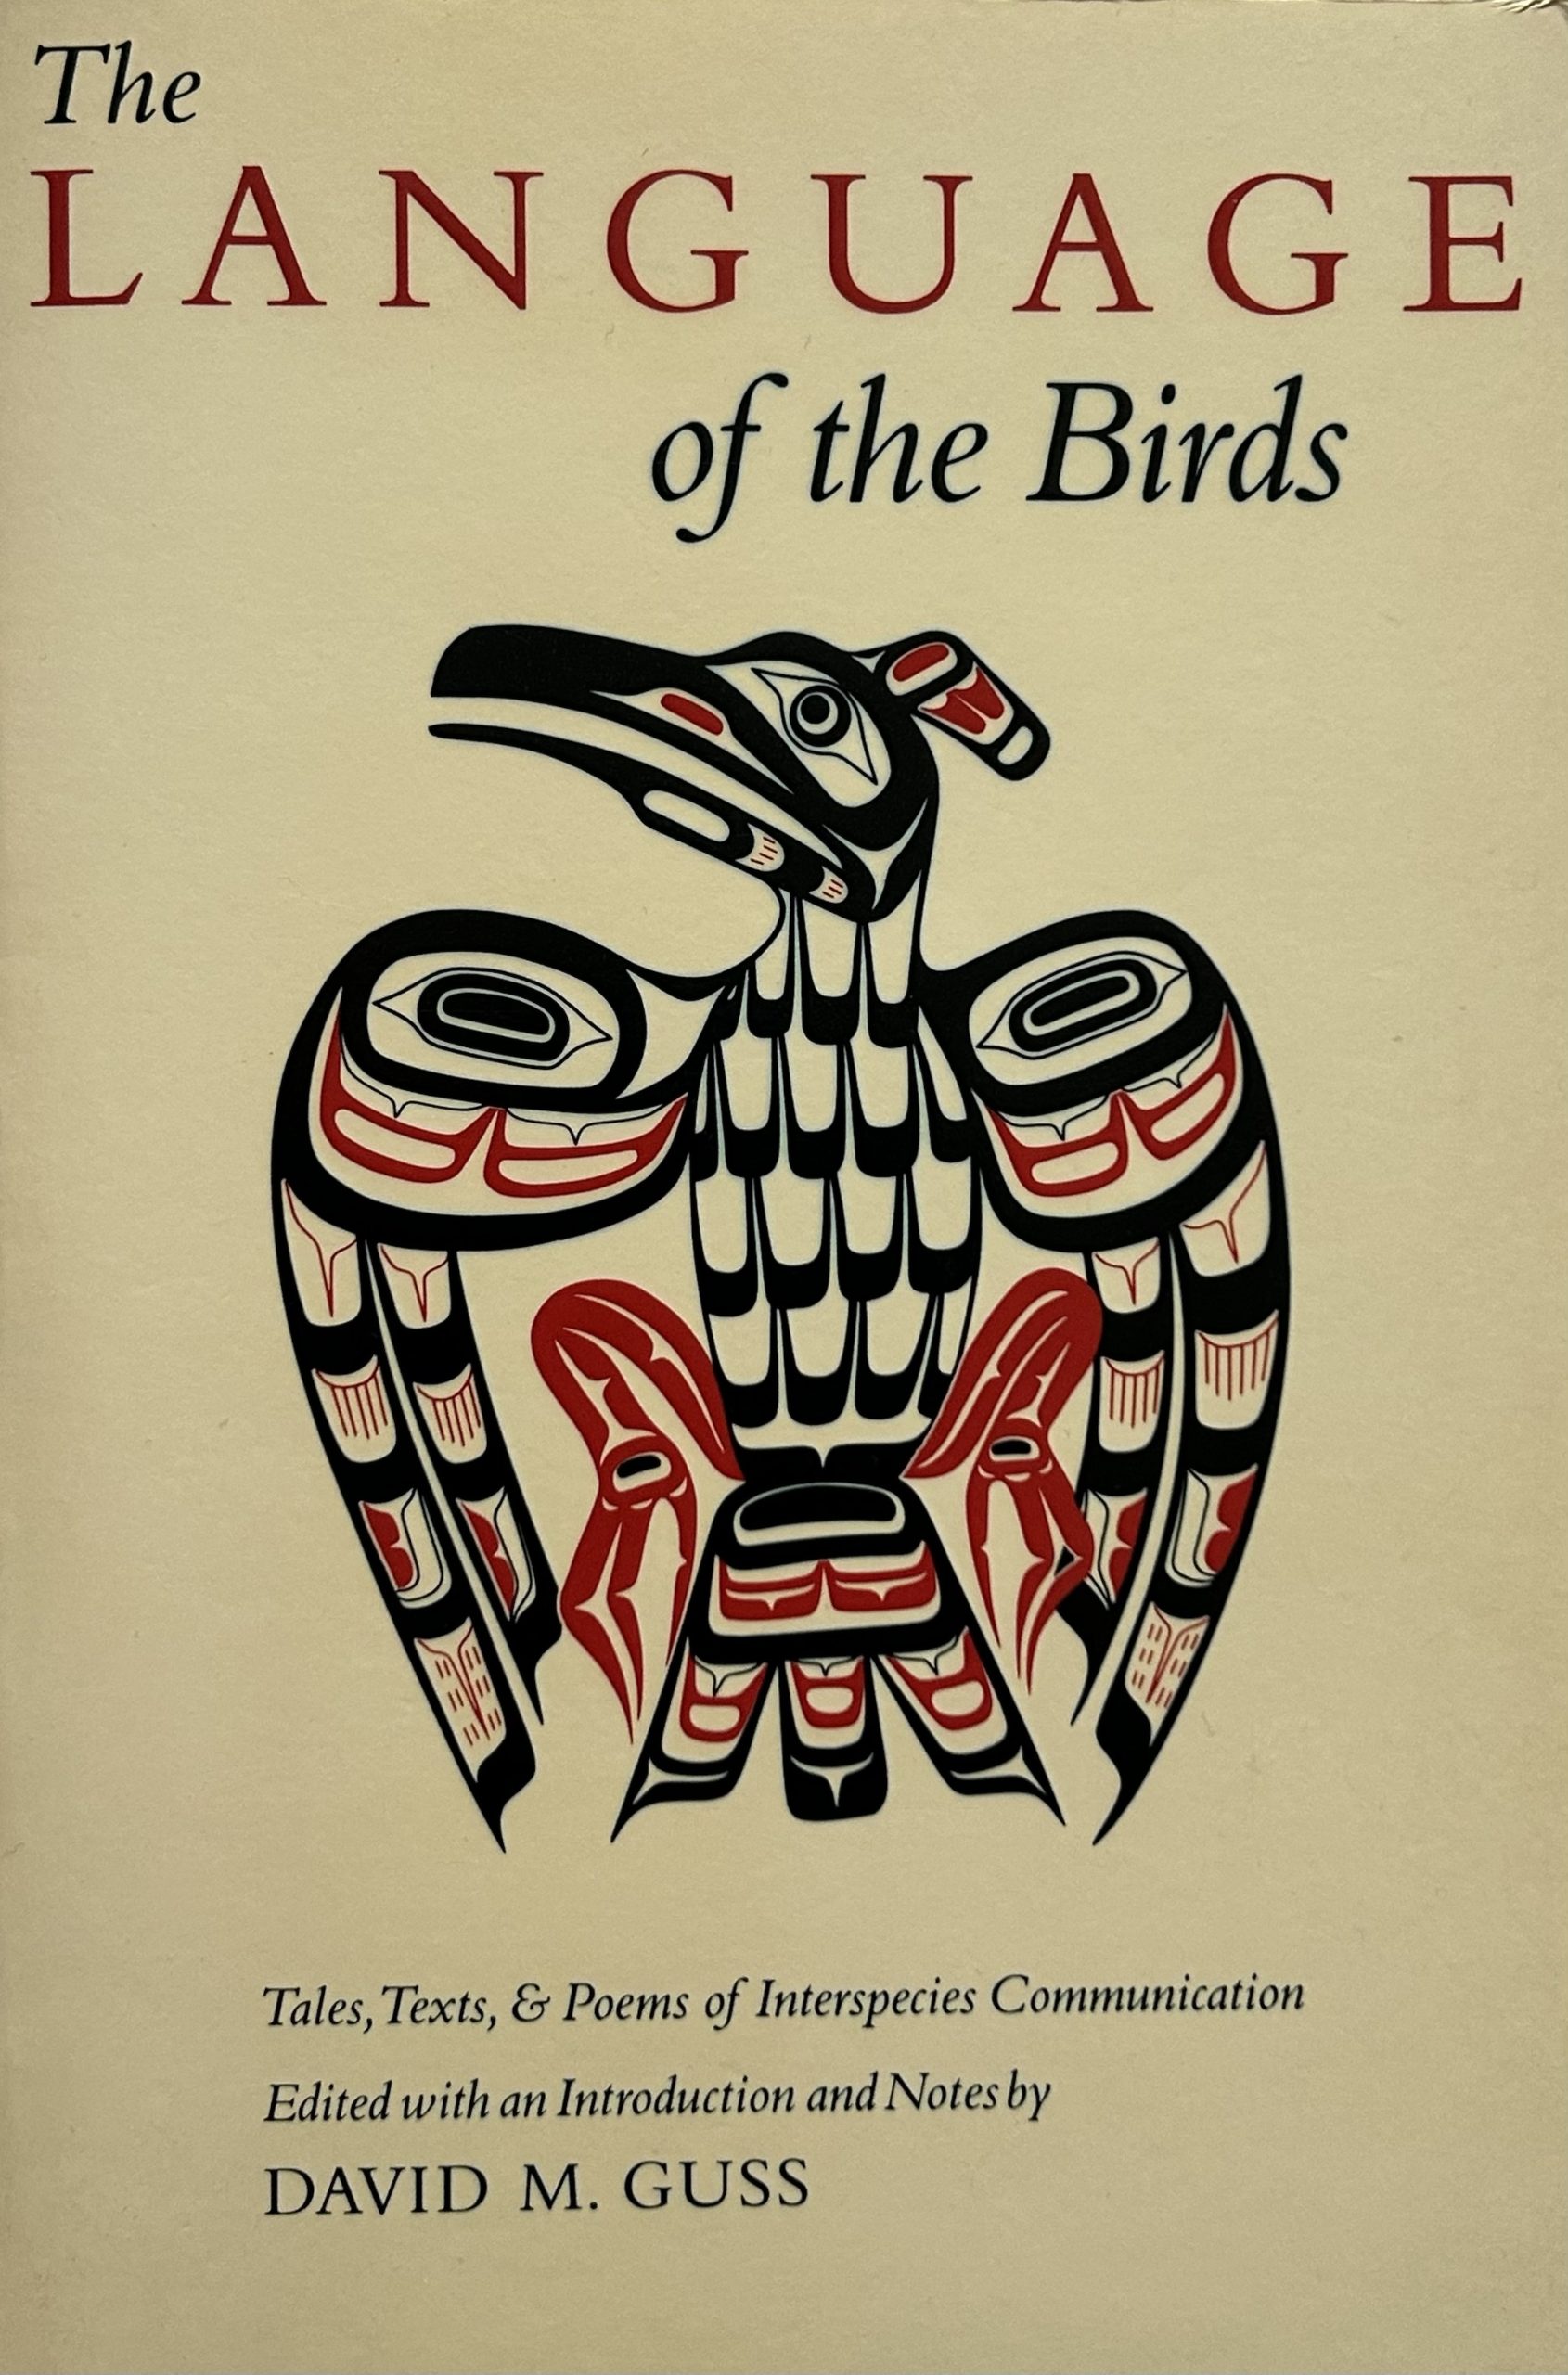 The Language of the Birds: Tales, Texts, & Poems of Interspecies Communication